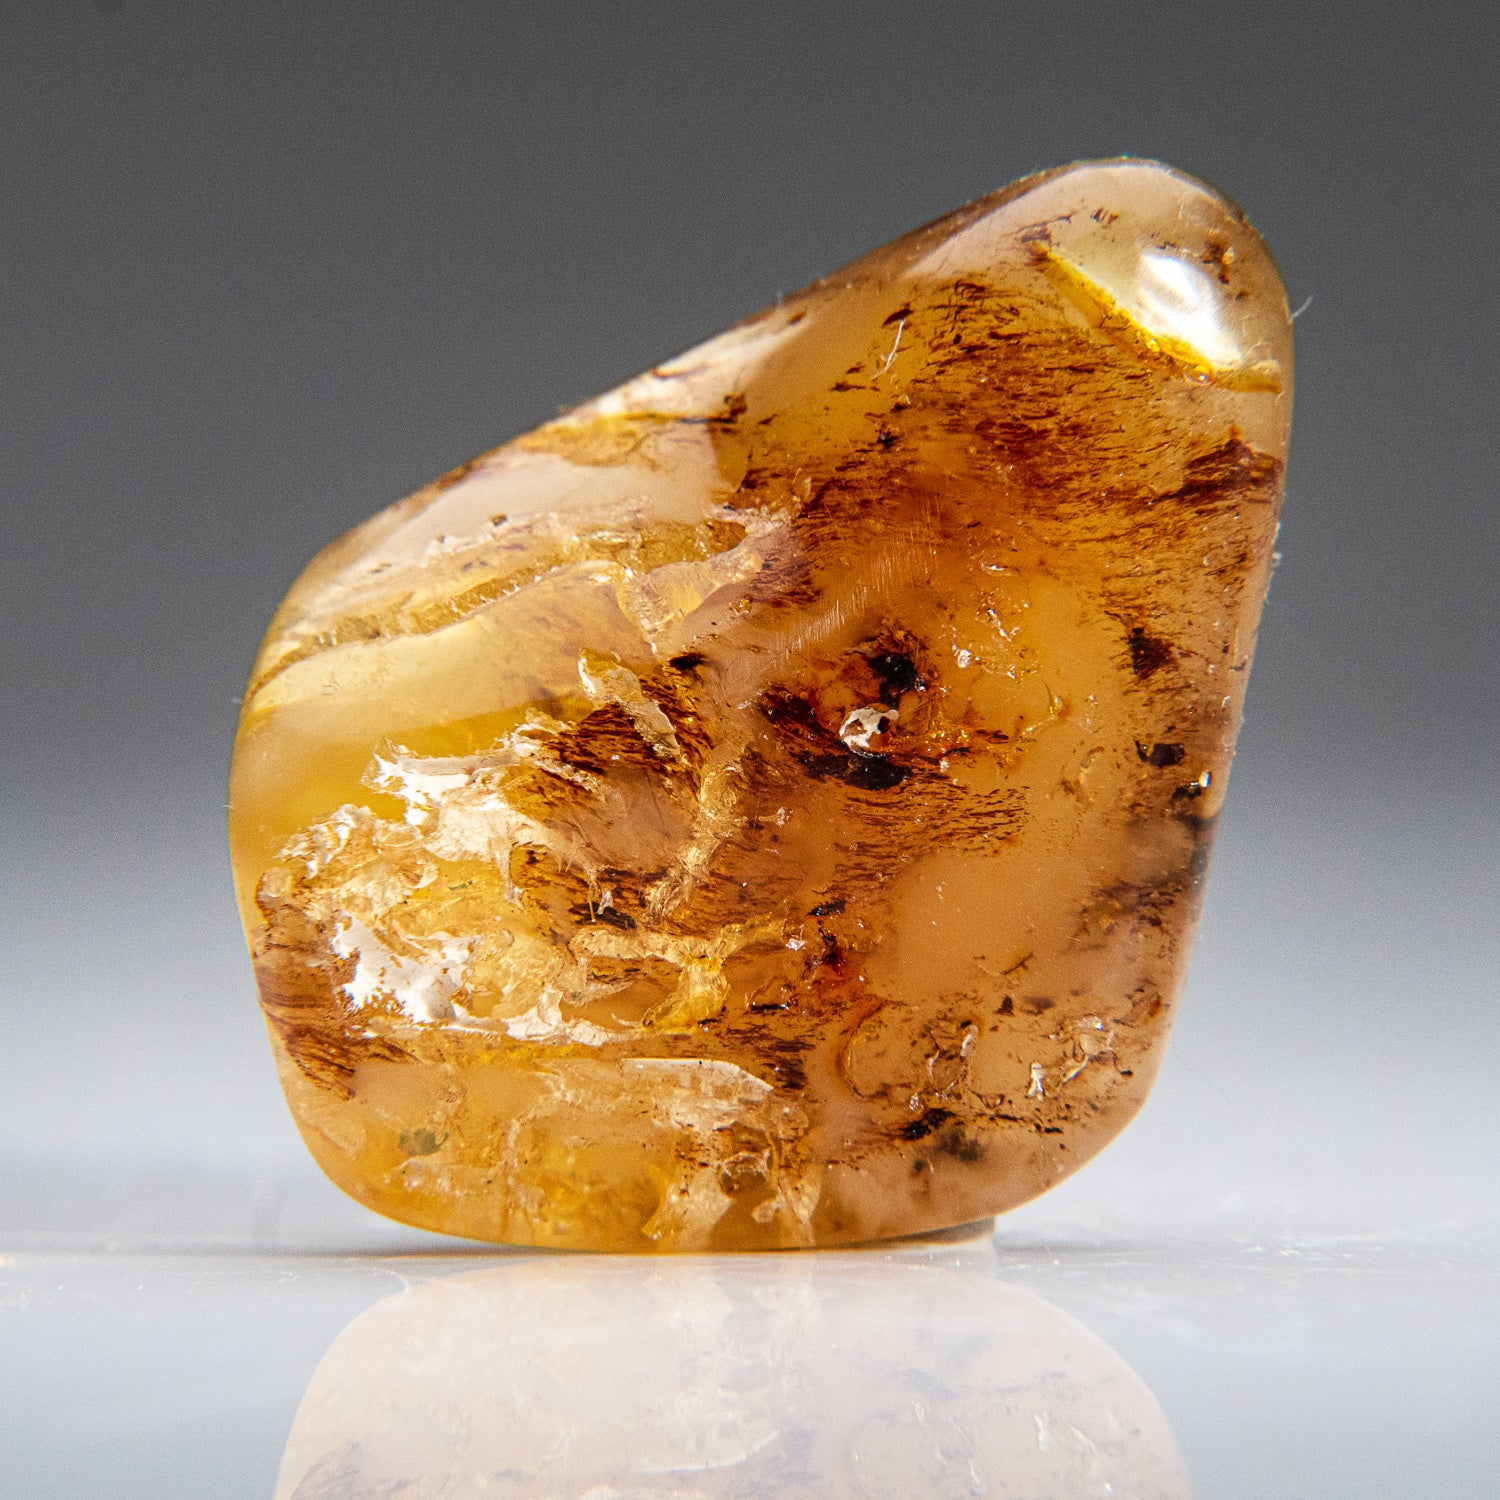 Genuine Gem-Quality Copal Amber from Colombia (11.5 grams)